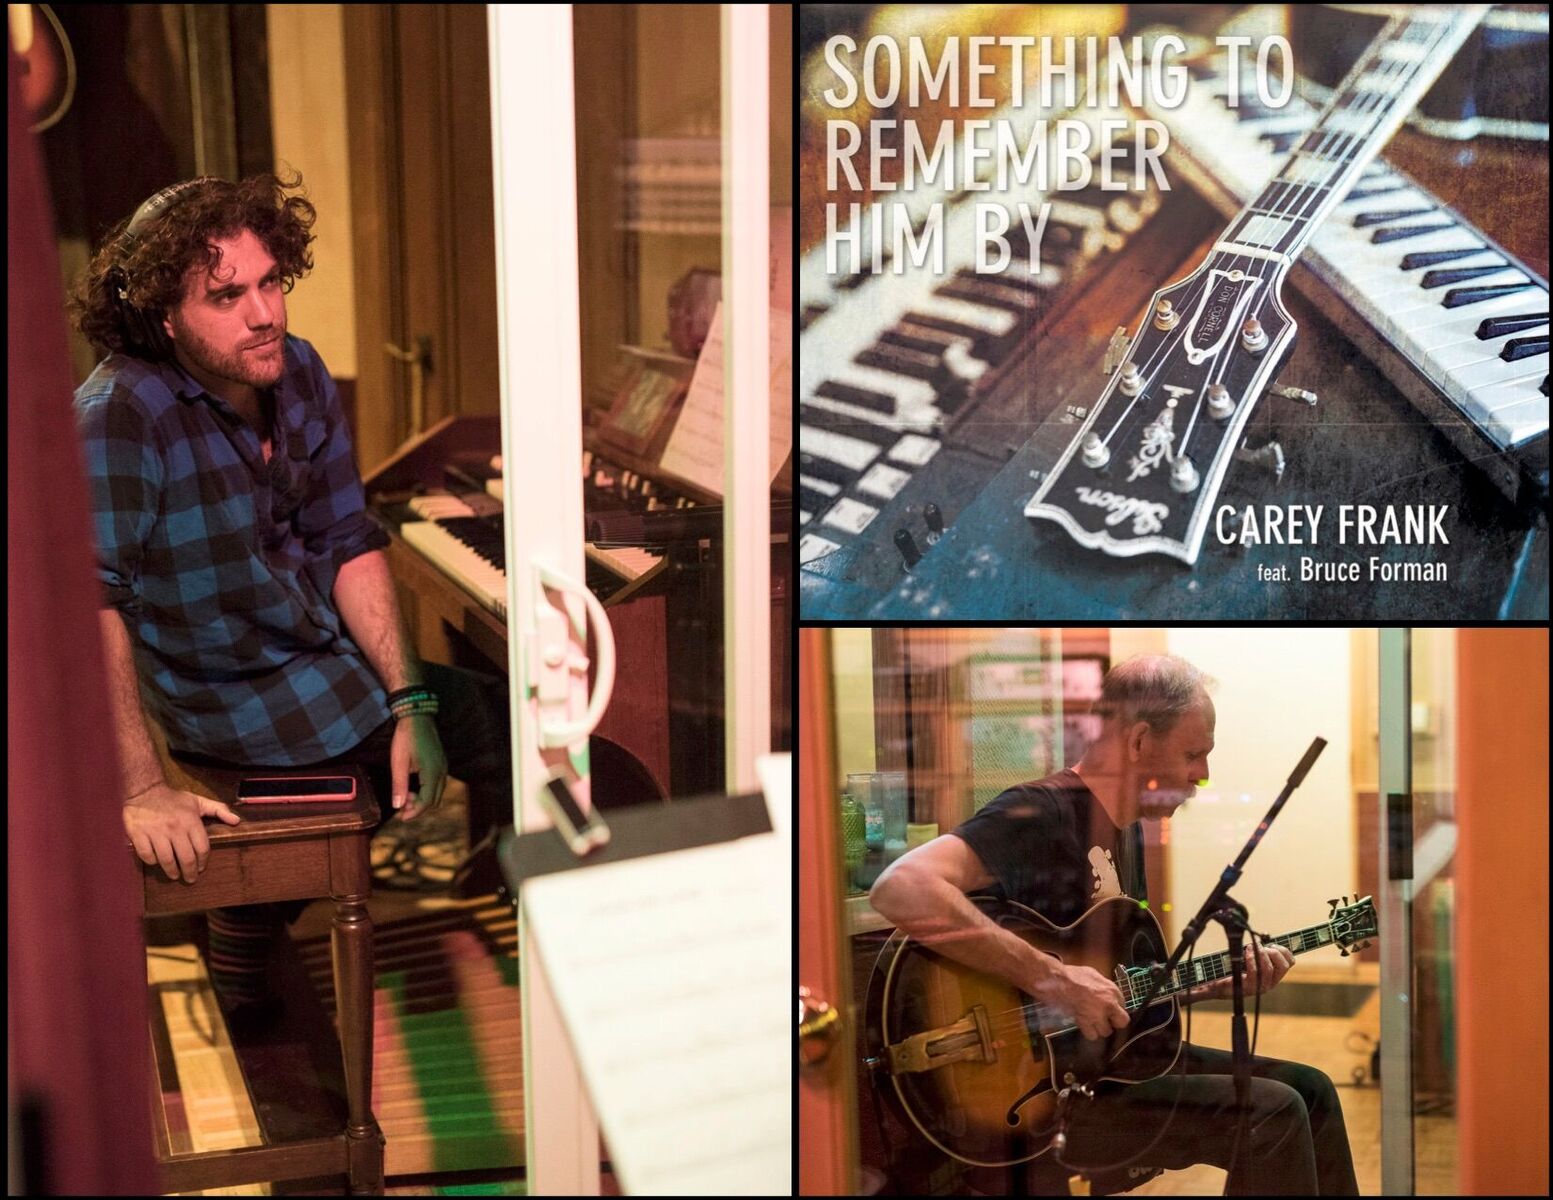 EXCLUSIVE PREMIERE | Carey Frank's Something To Remember Him By